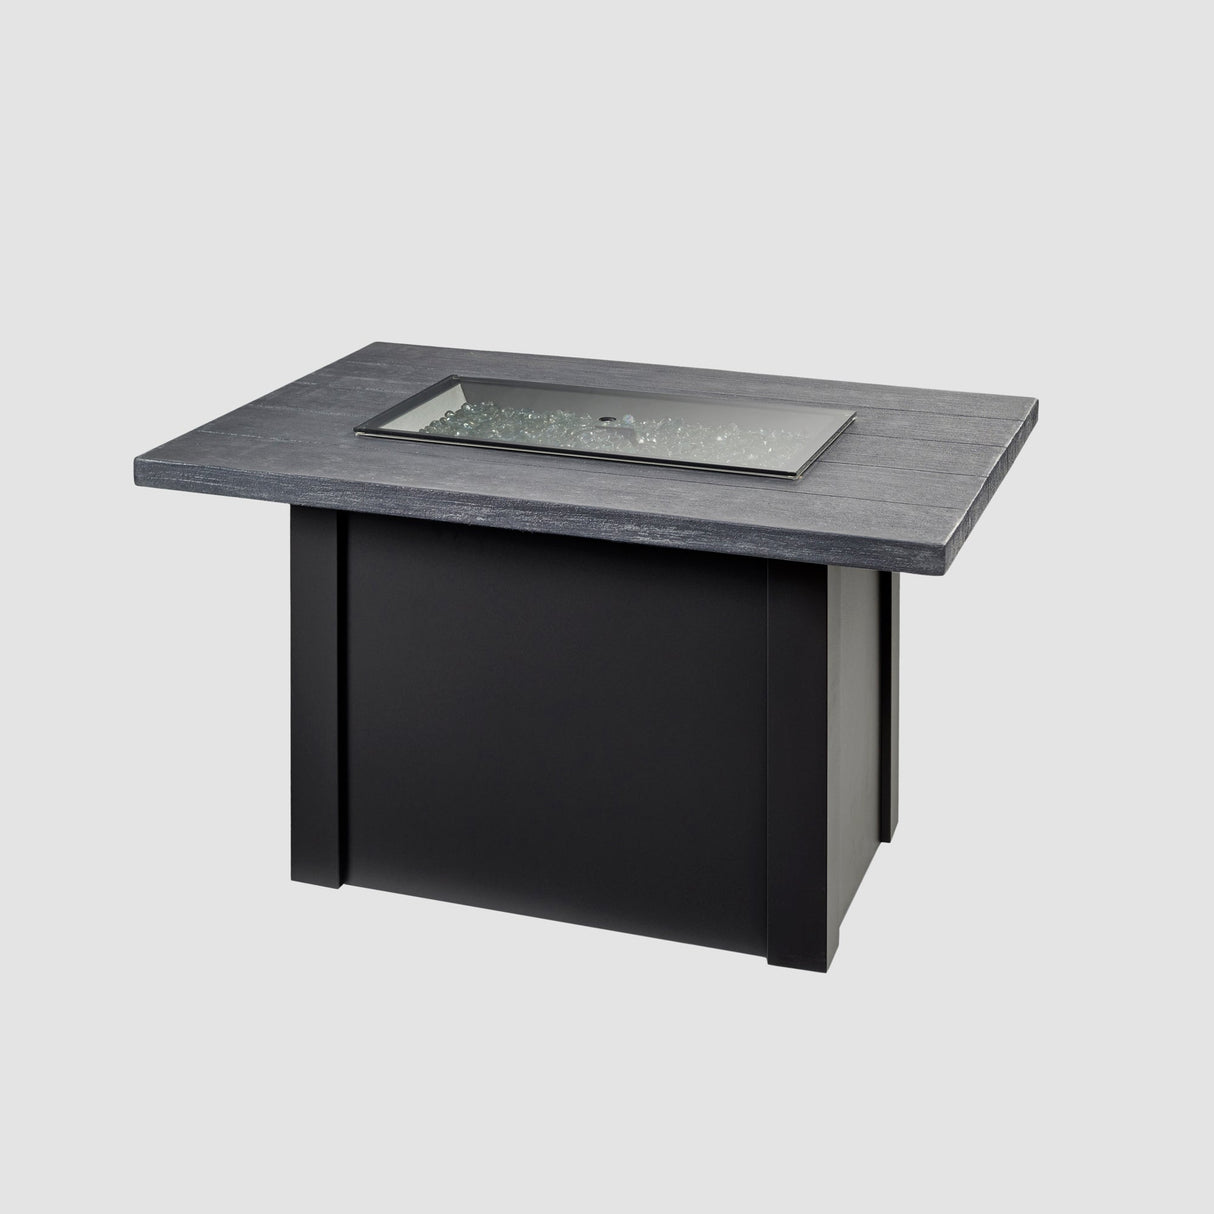 A grey glass burner cover placed on the top of a Havenwood Rectangular Gas Fire Pit Table with a Carbon Grey top and Luverne Black base